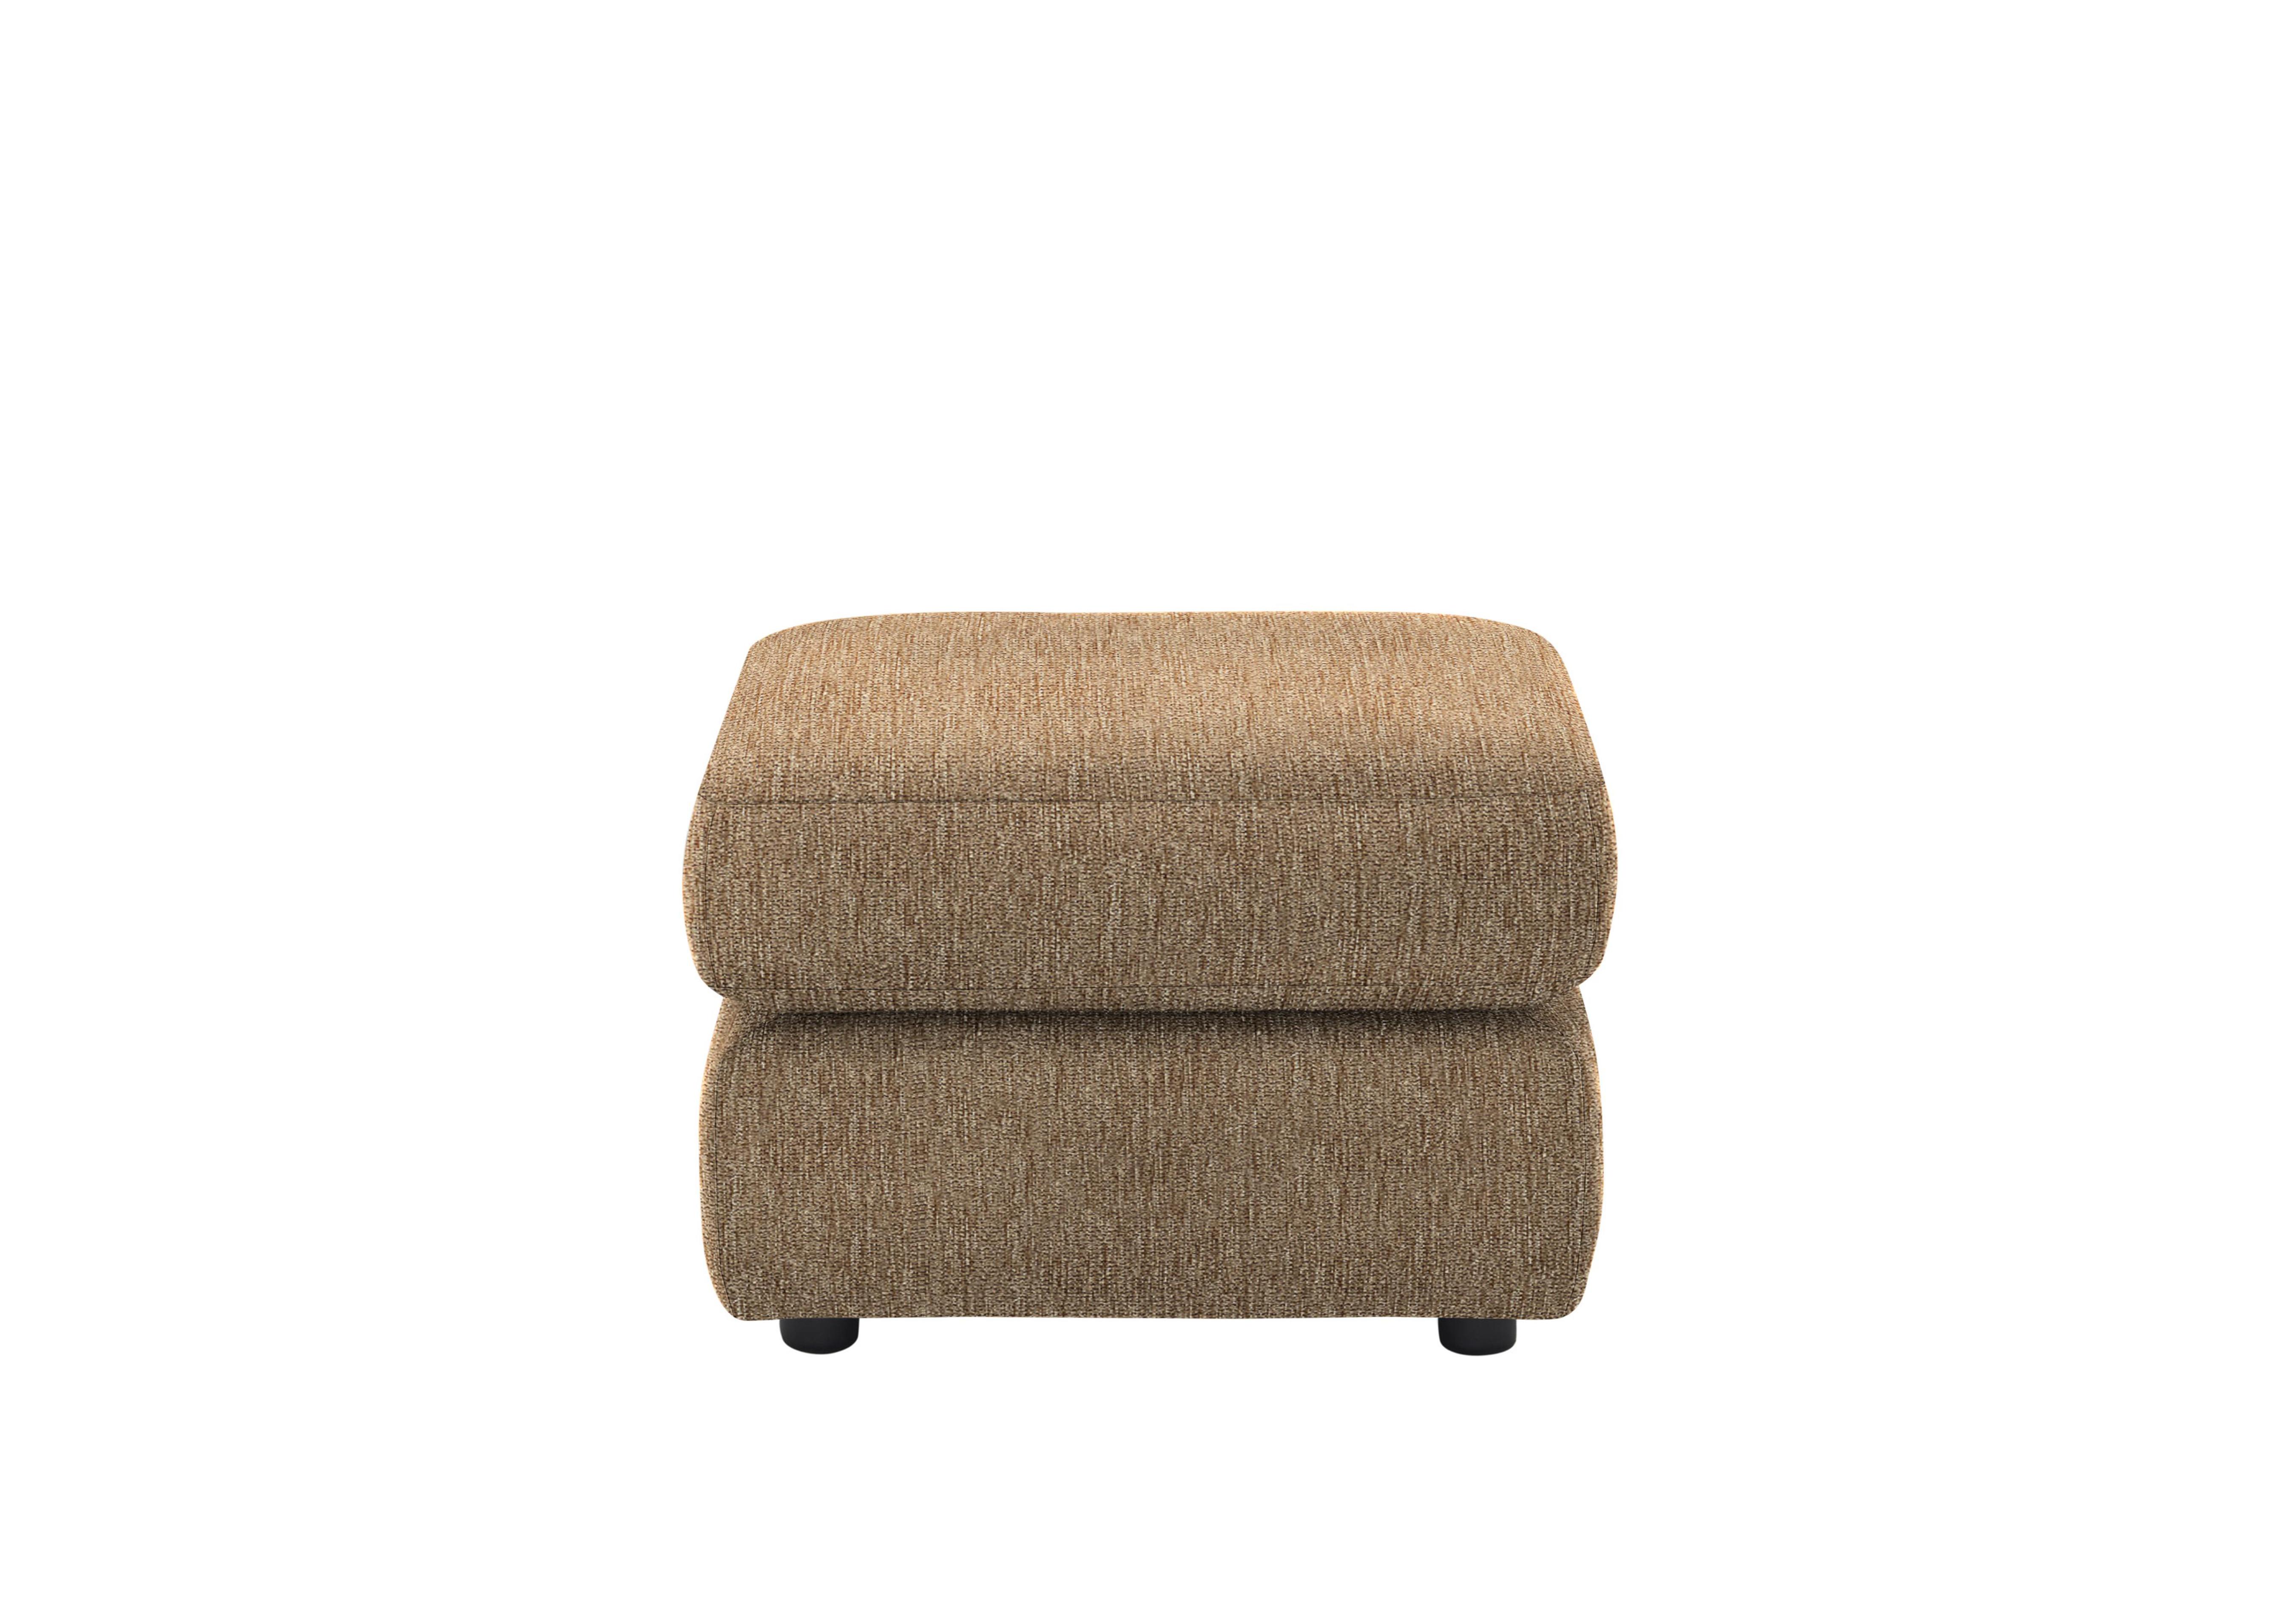 Avon Fabric Footstool in A070 Boucle Cocoa on Furniture Village